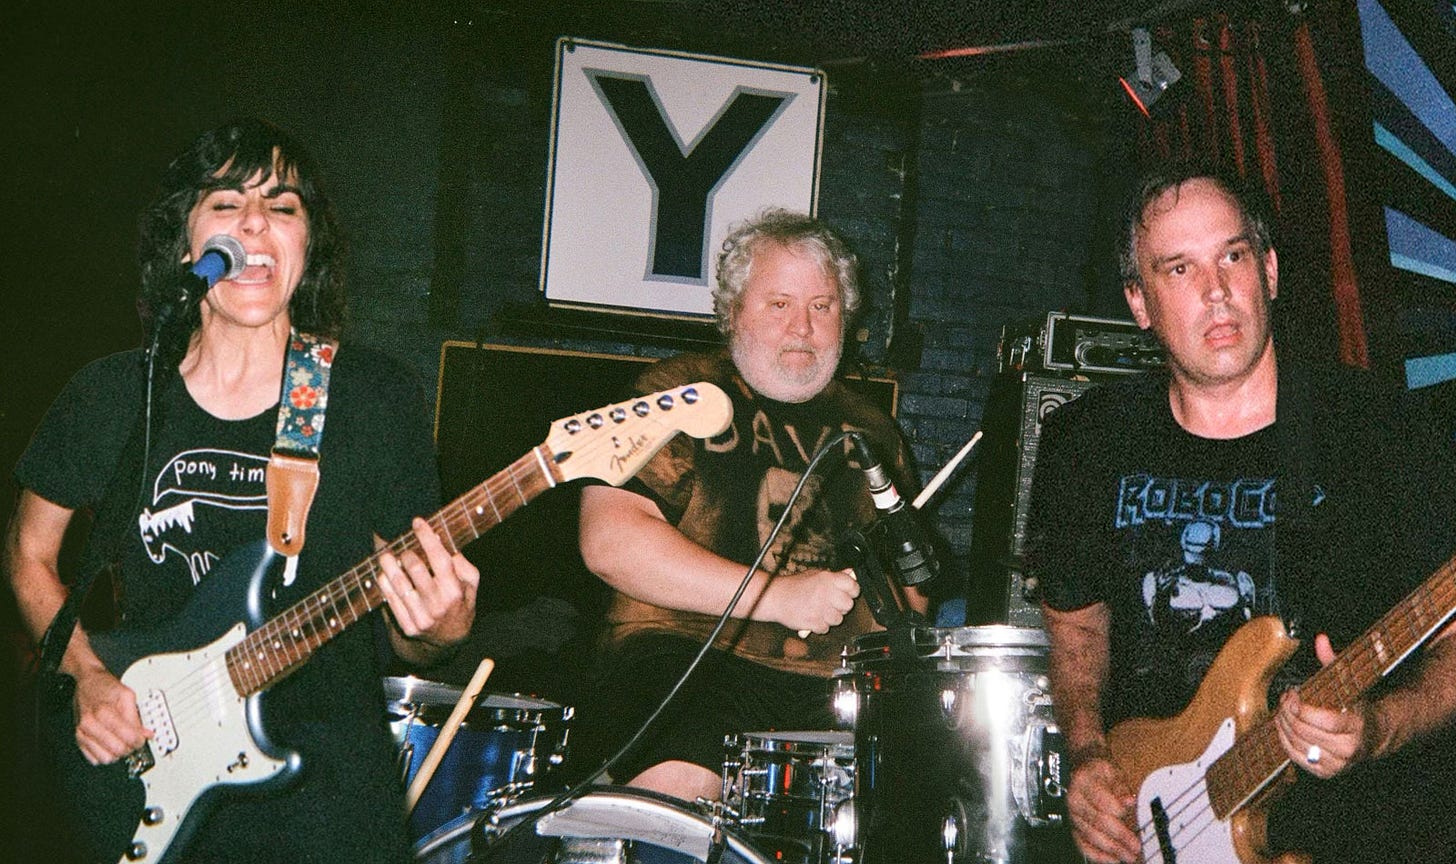 The band wimps playing a recent show